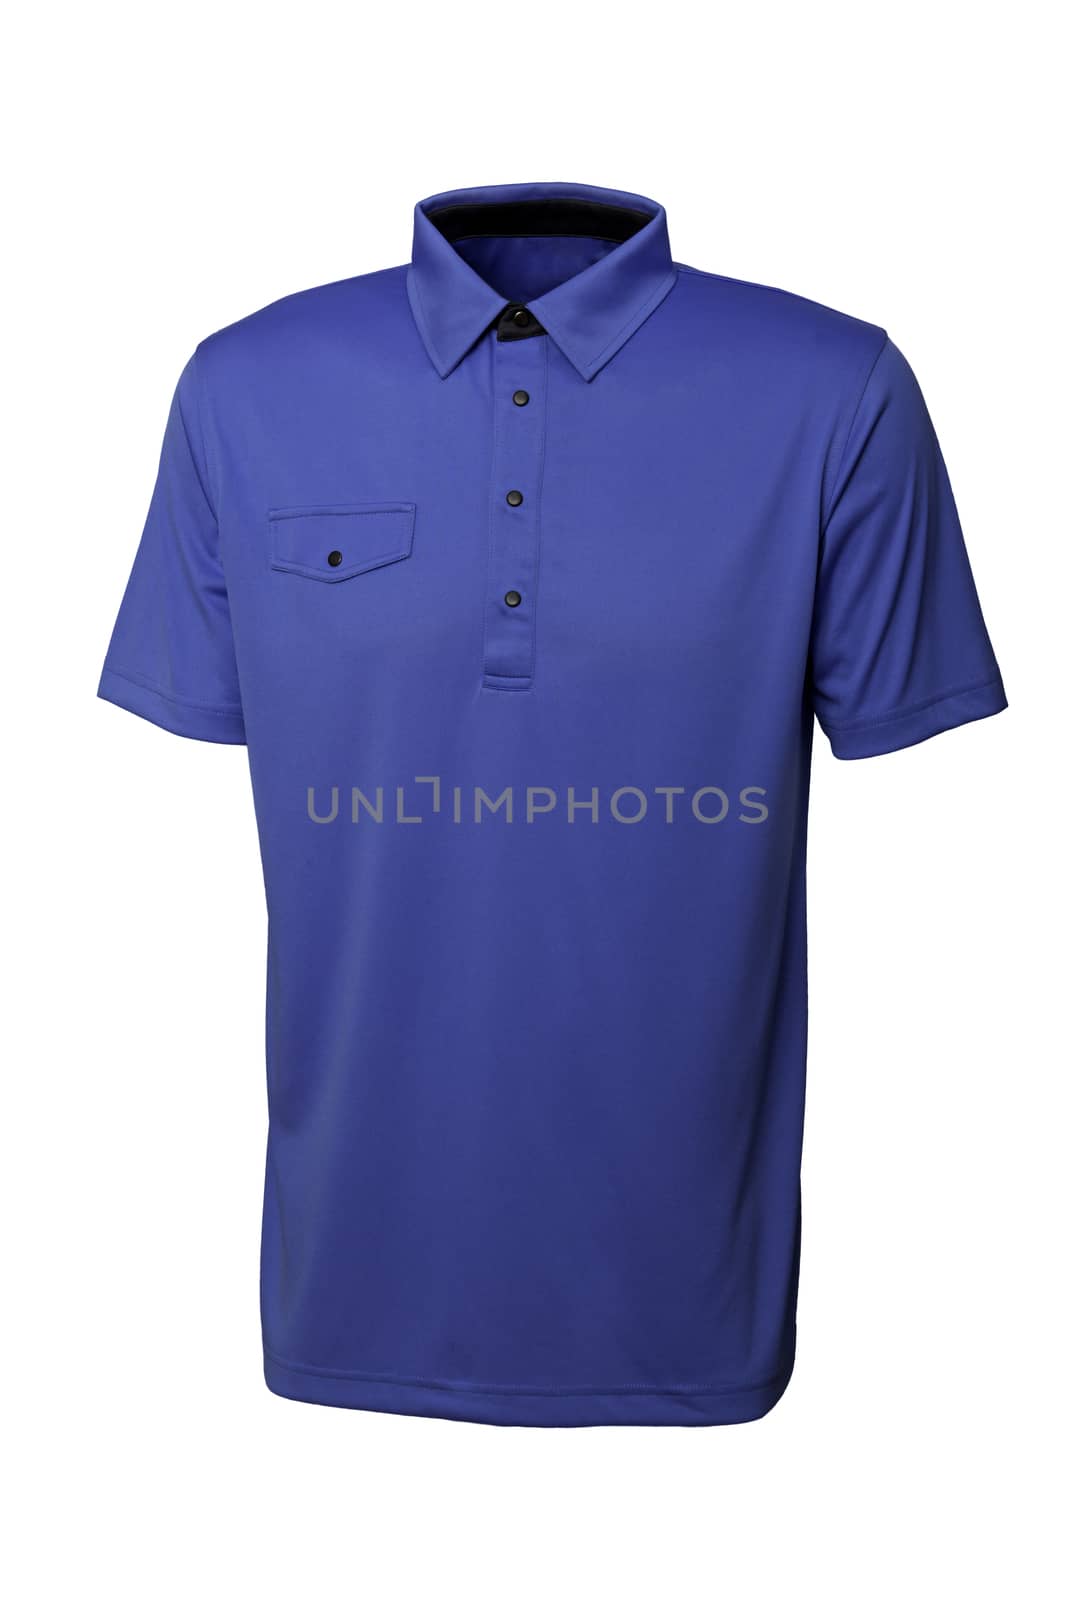 Golf blue tee shirt for man or woman by praethip